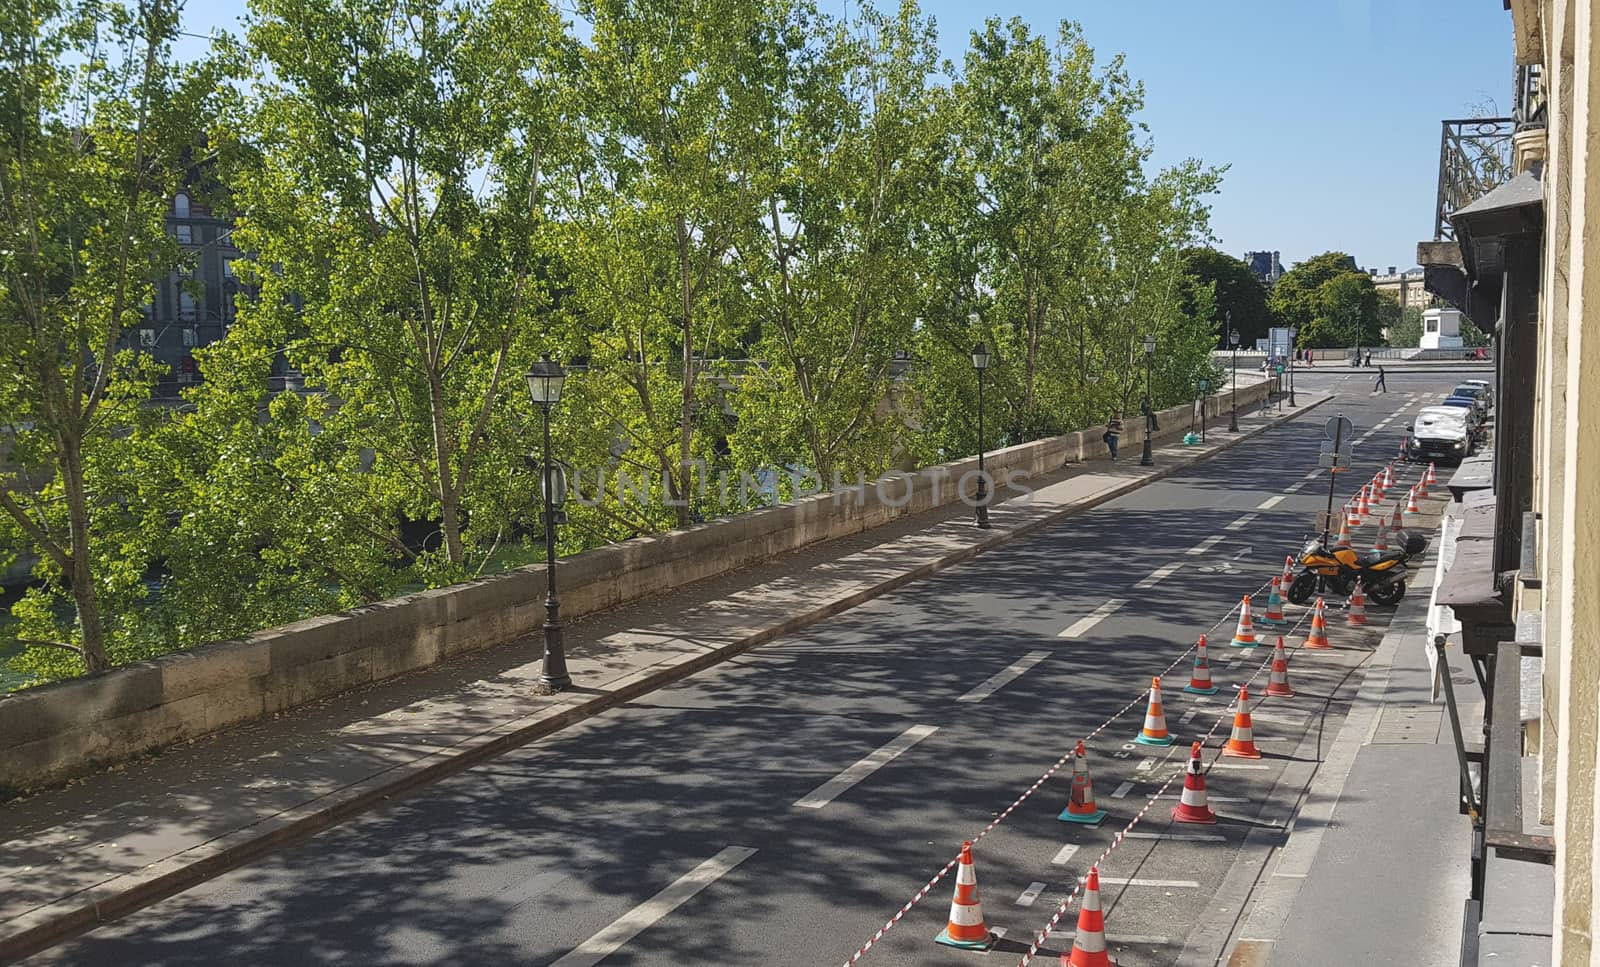 Paris embankment with trees and traffic cones